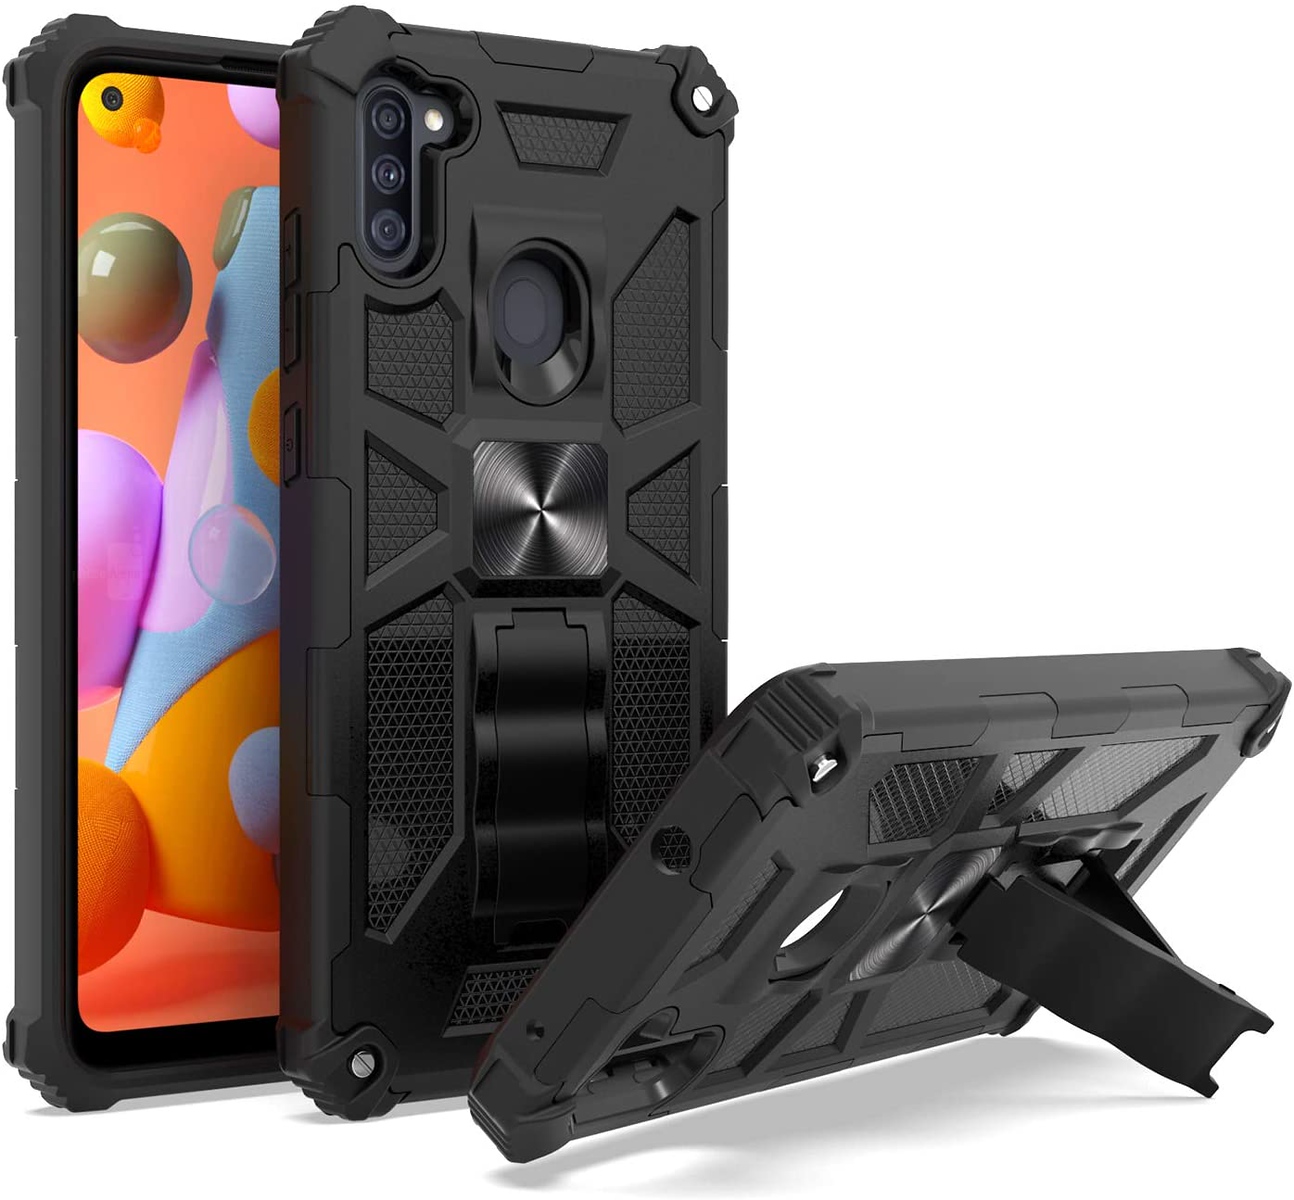 Xpression Case for Motorola Moto G Power 2021 with Invisible Kickstand Stand Dual Layer Hybrid Defender Military Grade Shockproof Hard TPU Phone Cover [Black] - image 3 of 8